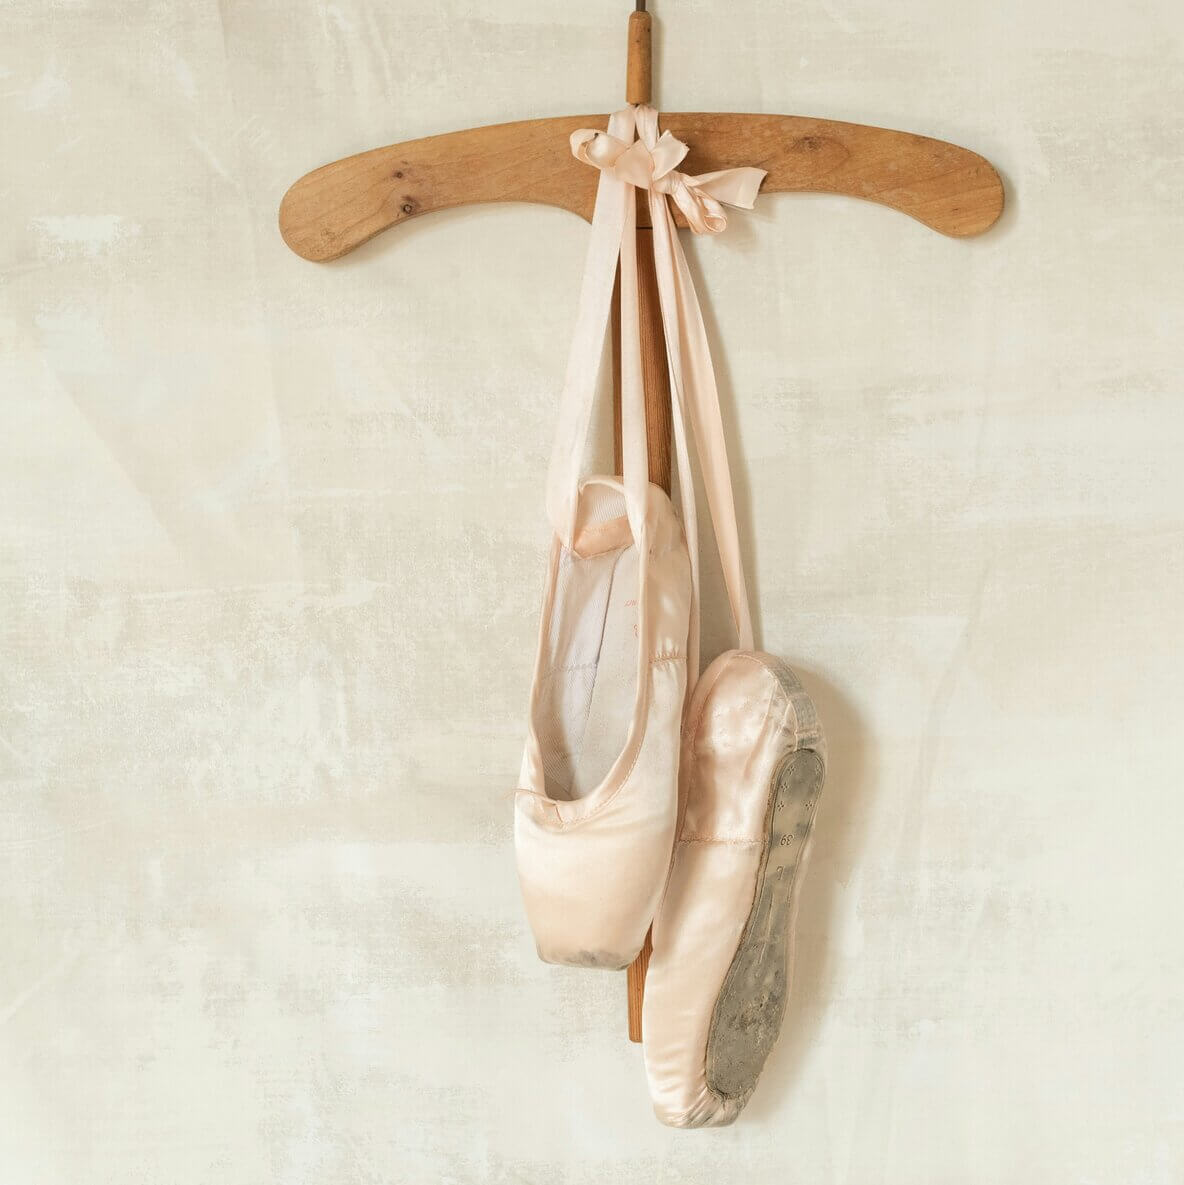 Dance shoes hanging on a hanger.